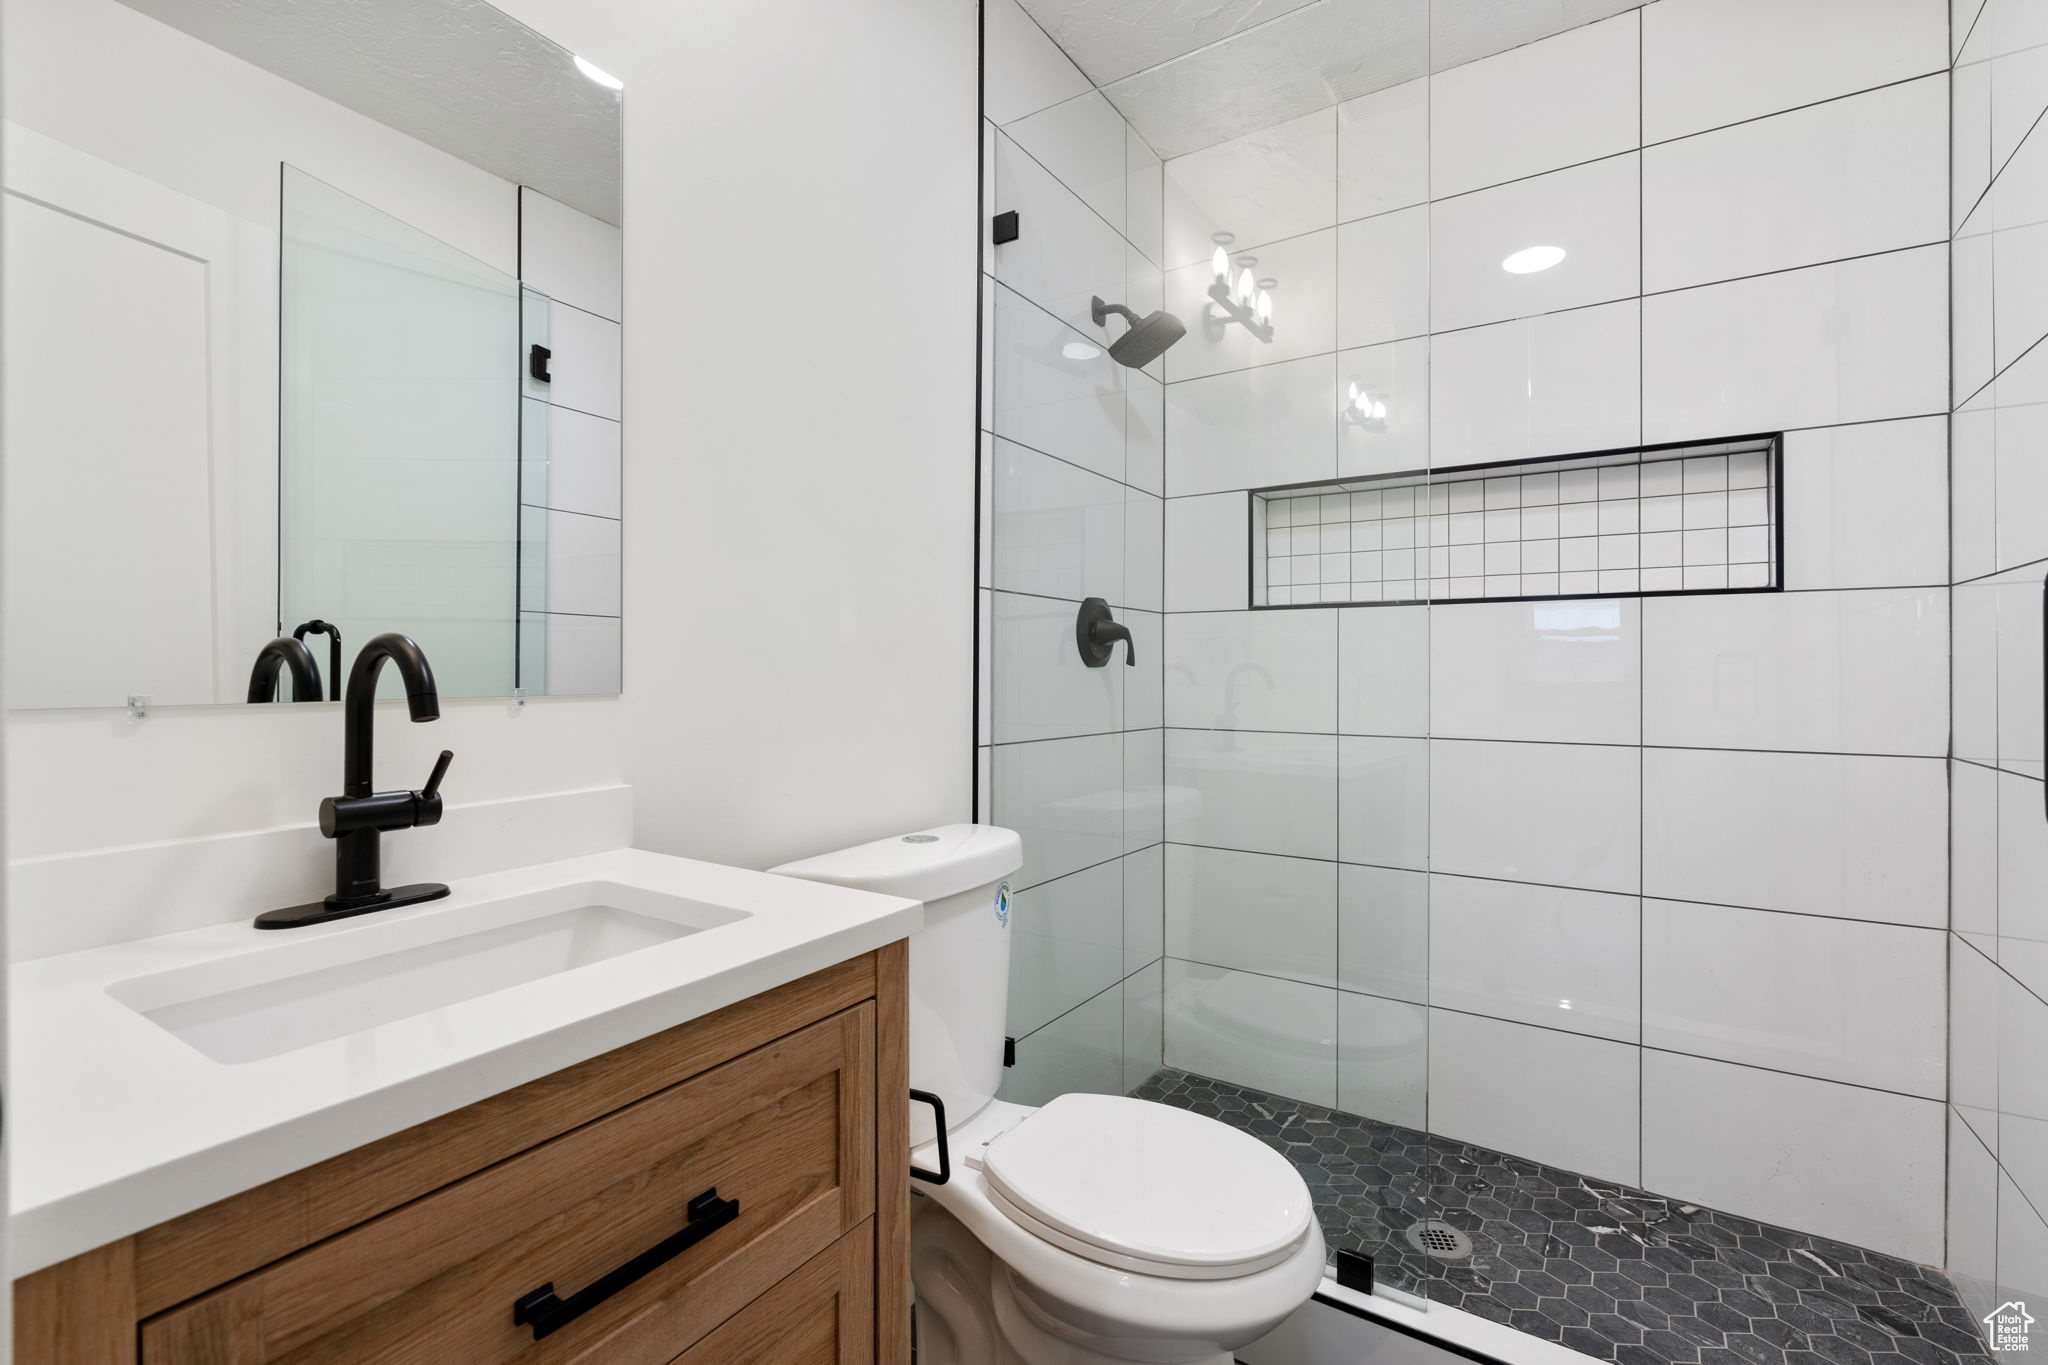 Bathroom with oversized vanity, an enclosed shower, and toilet